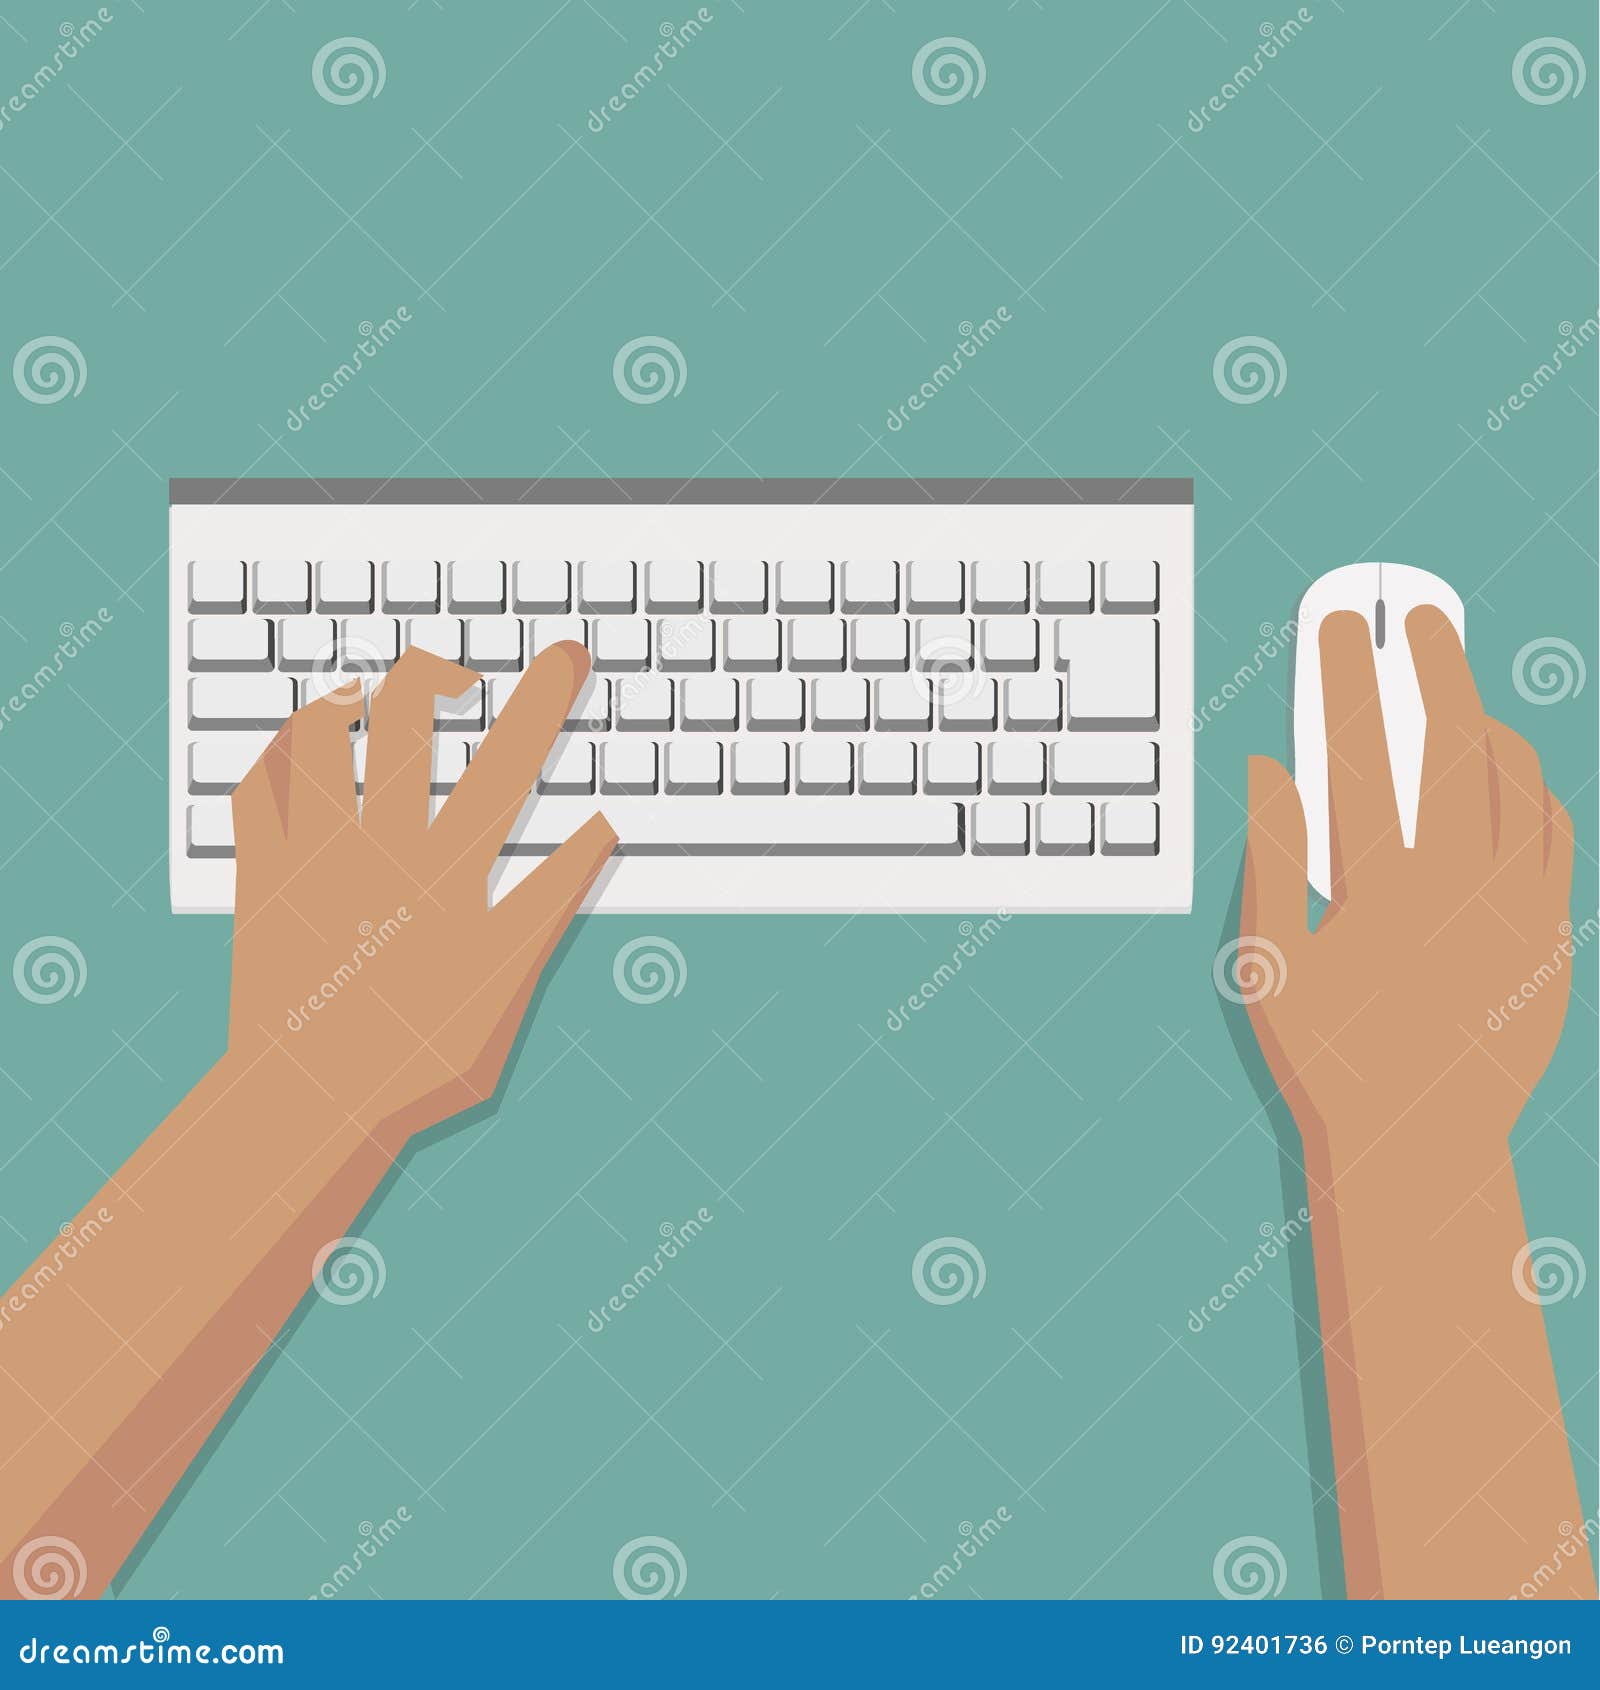 flat hands typing on white keyboard with mouse